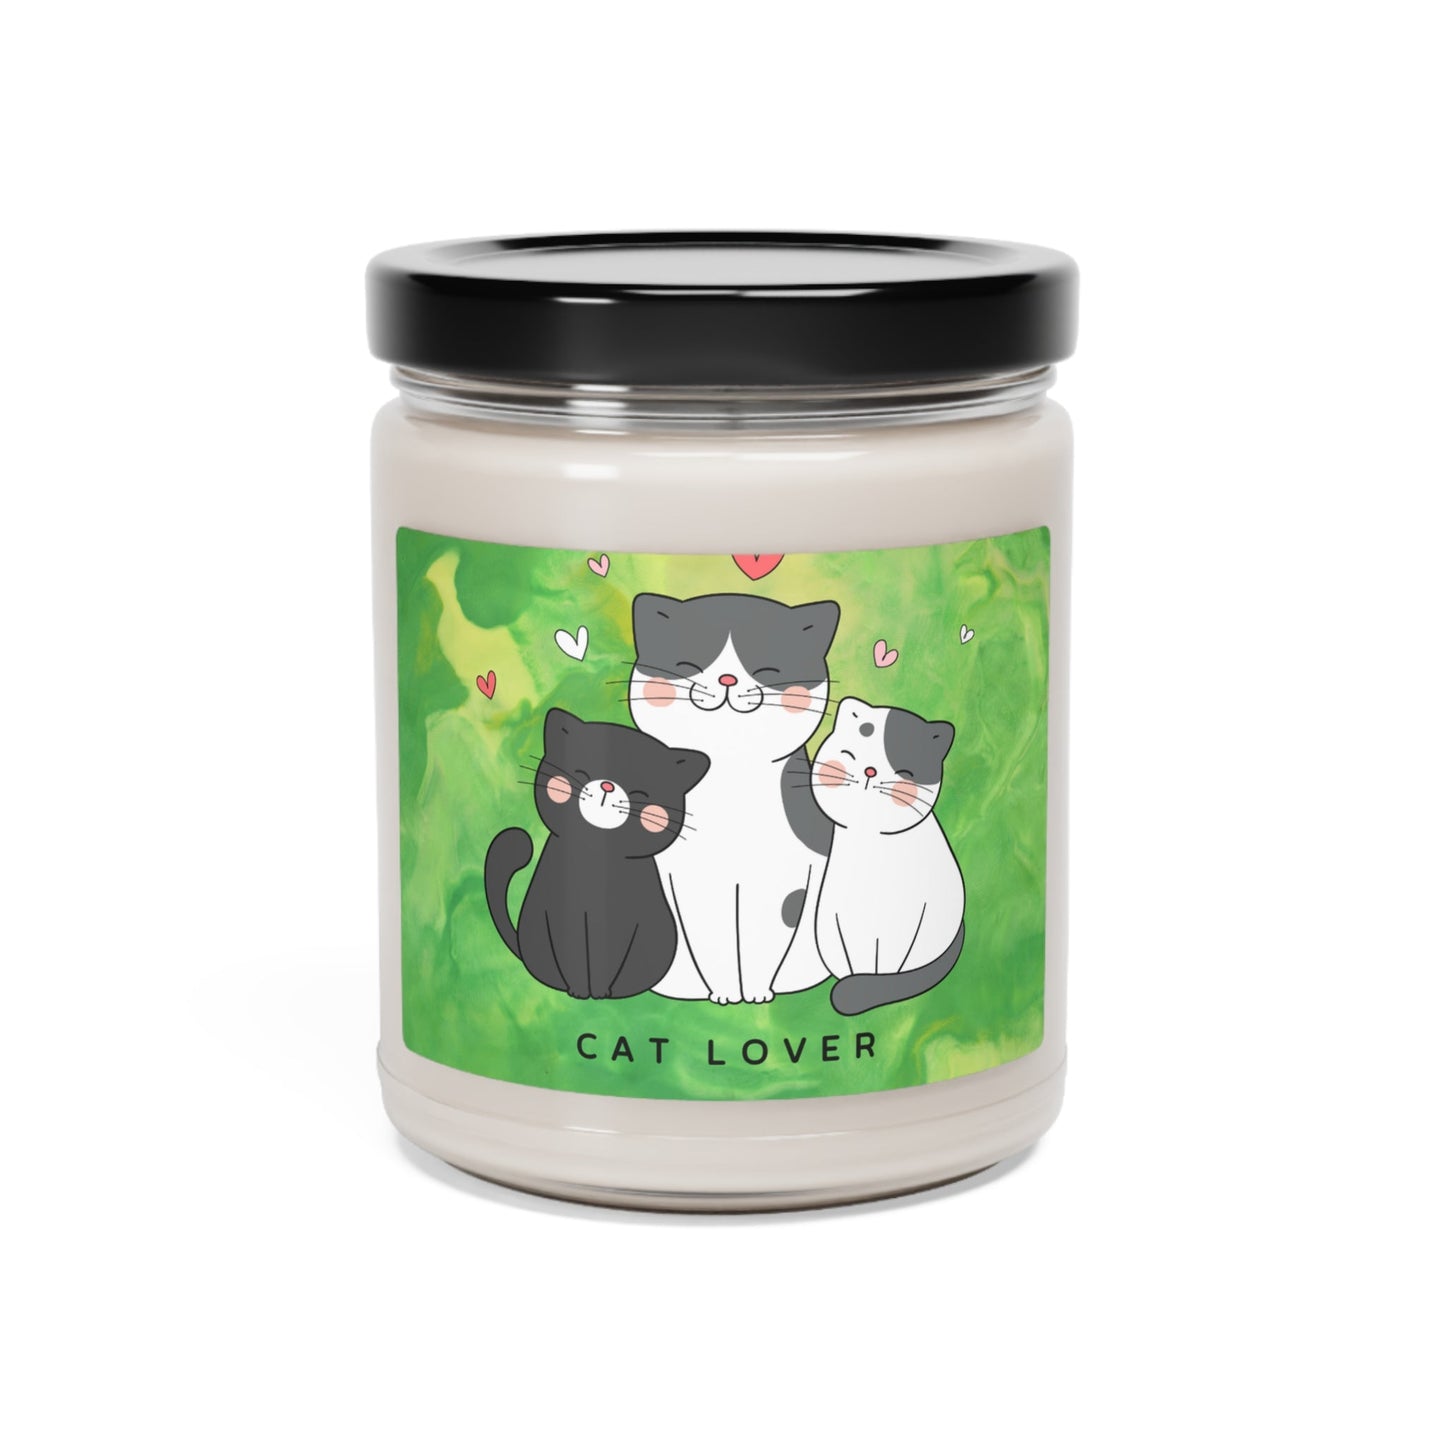 Cat Lover Scented Soy Candle, 9oz - Home Decor - Epileptic Al’s Shop